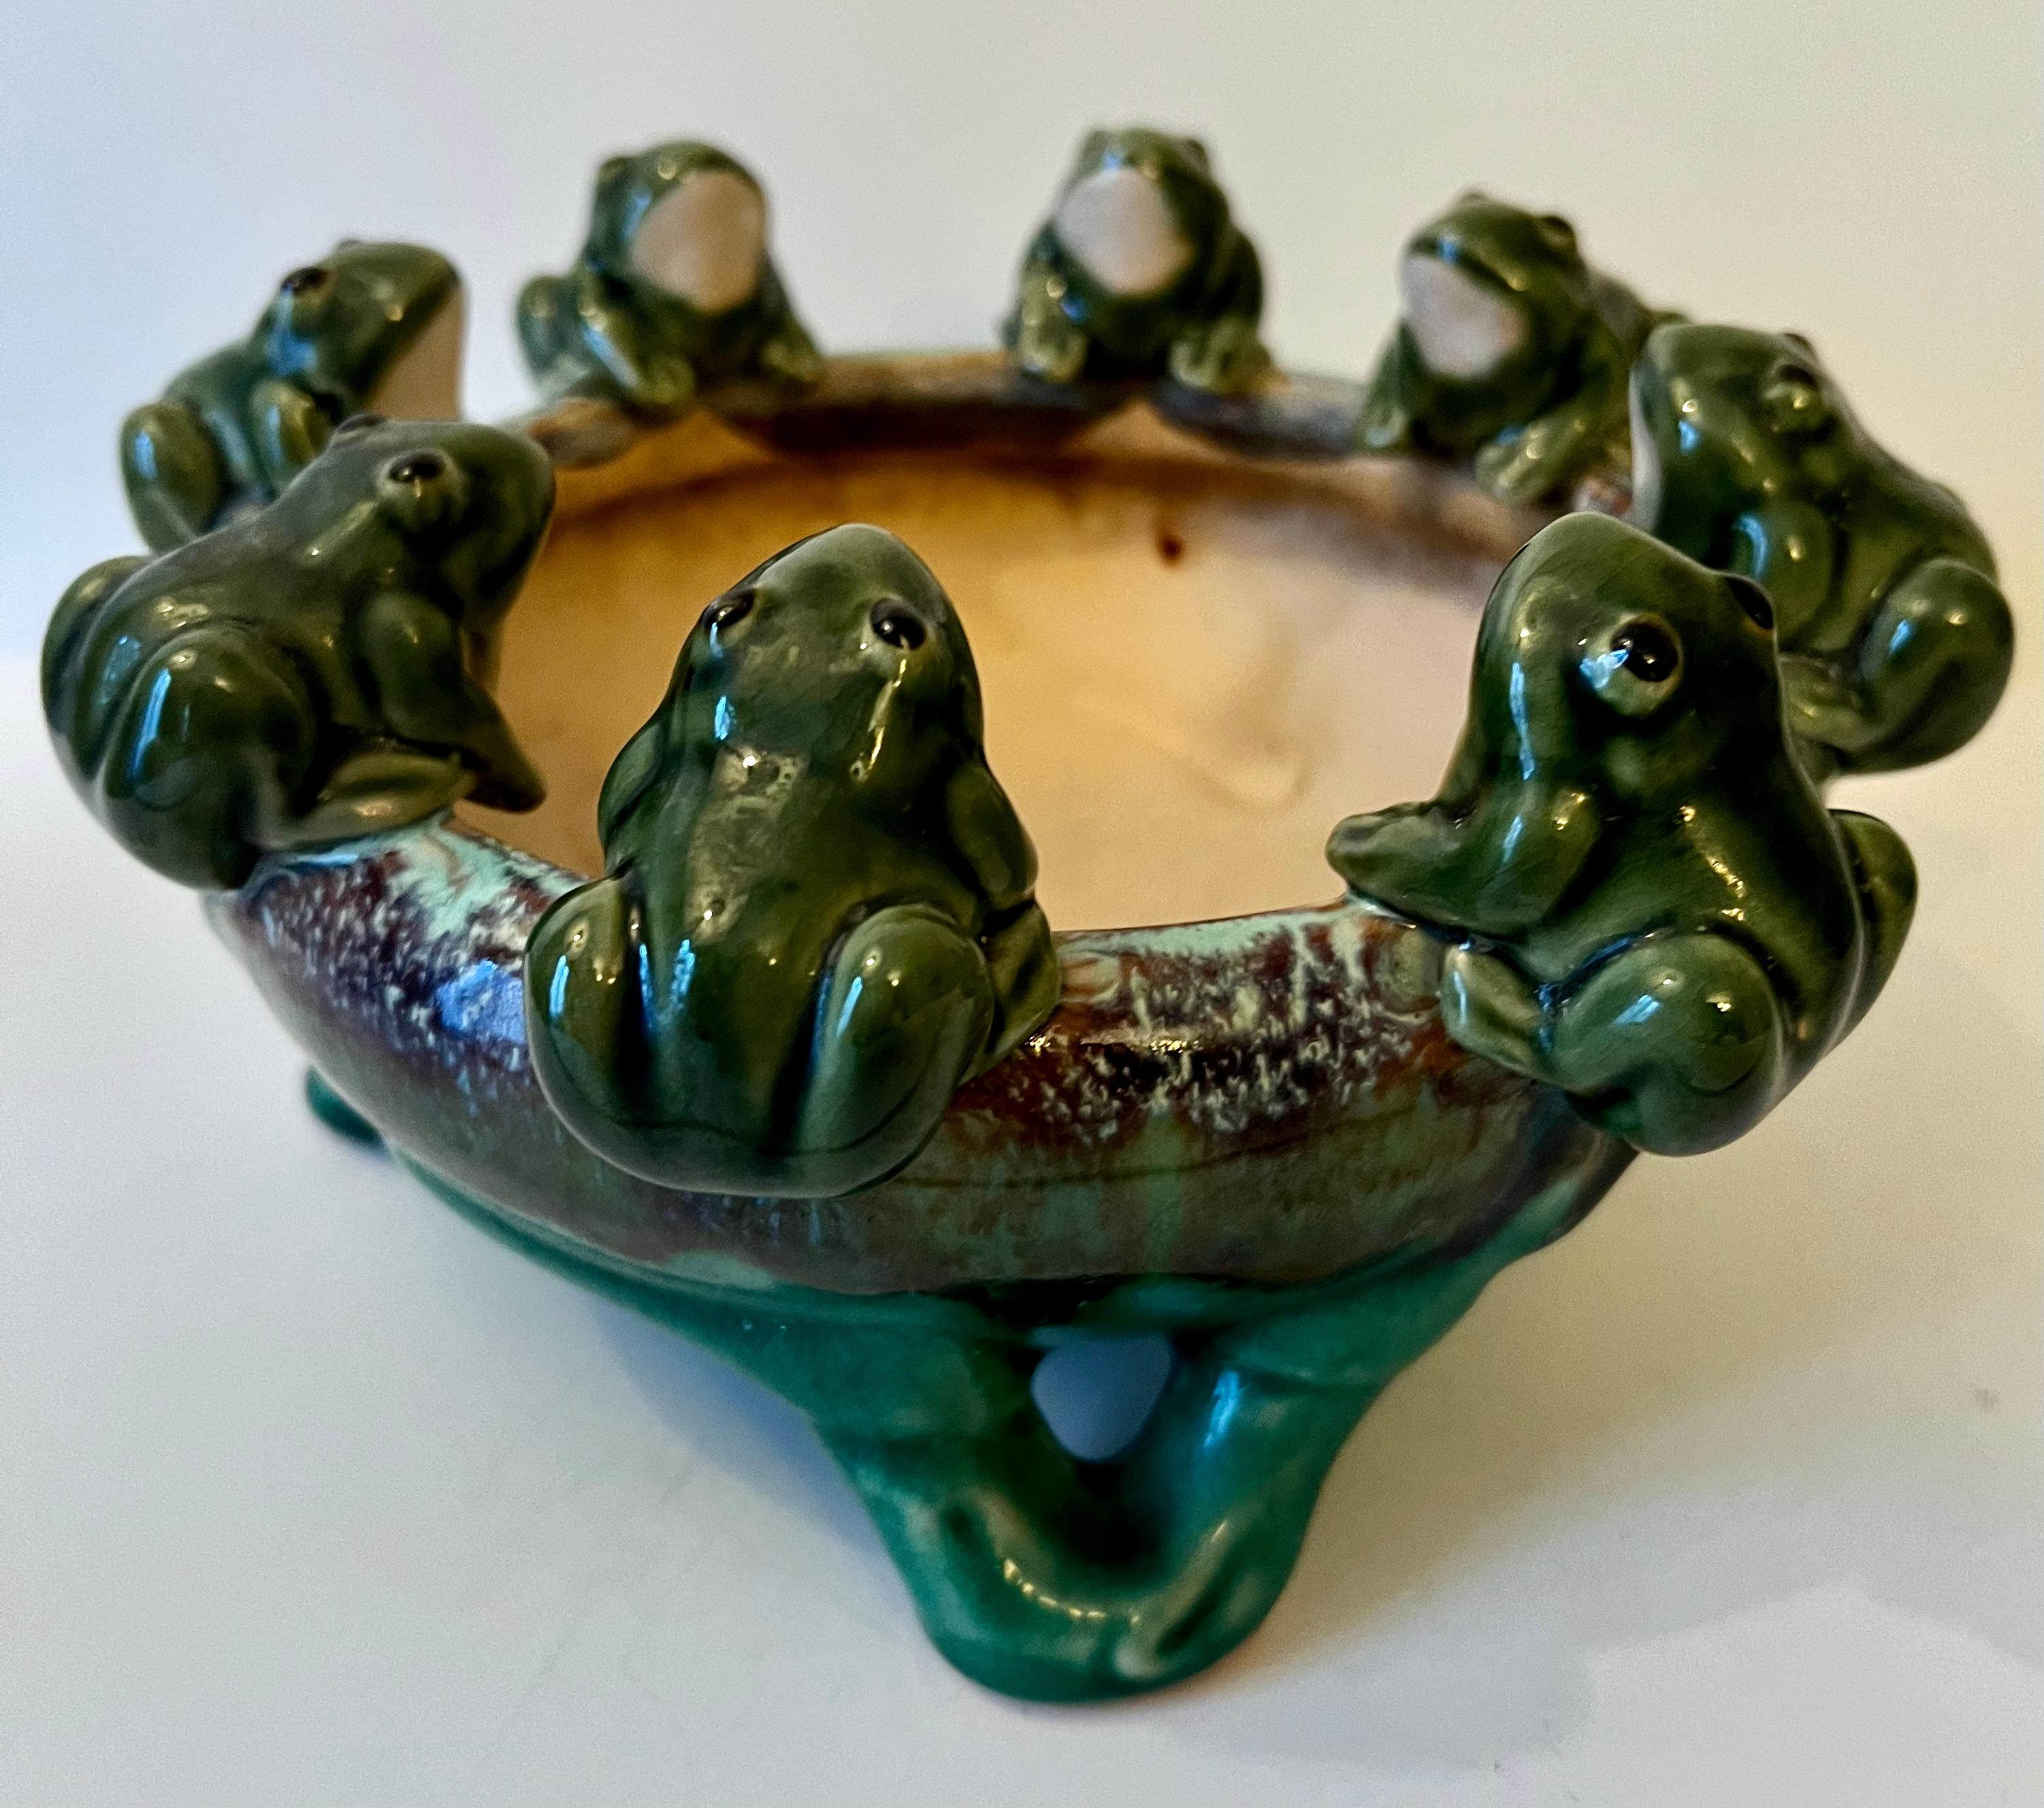 20th Century Glazed Terracotta Footed Planter or Jardiniere with Frogs 